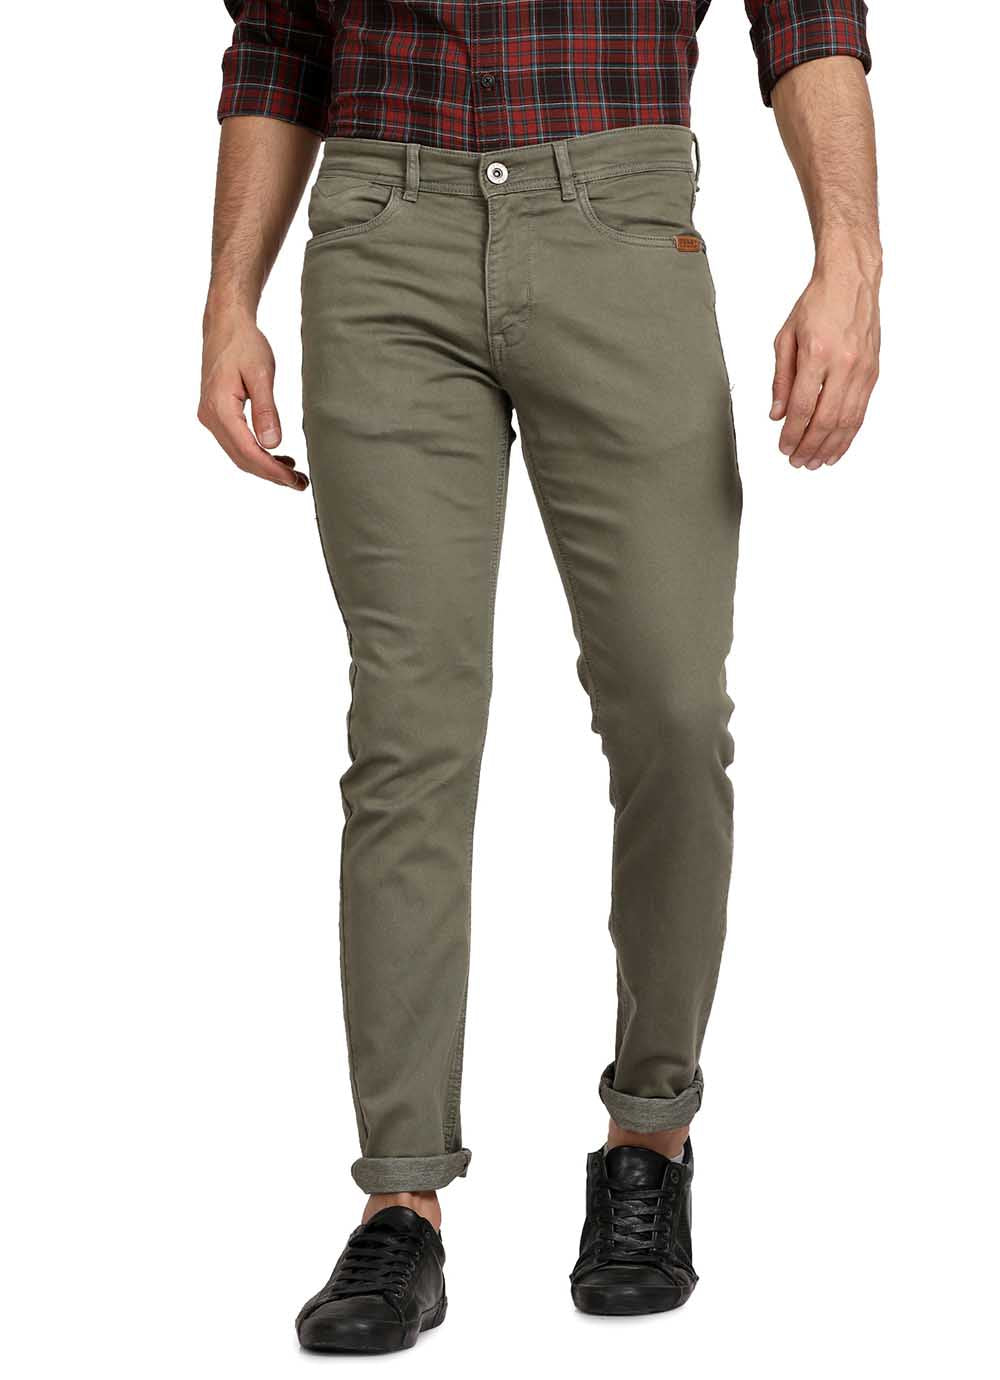 Derby Olive Clean Look Slim Fit Knitted Jeans